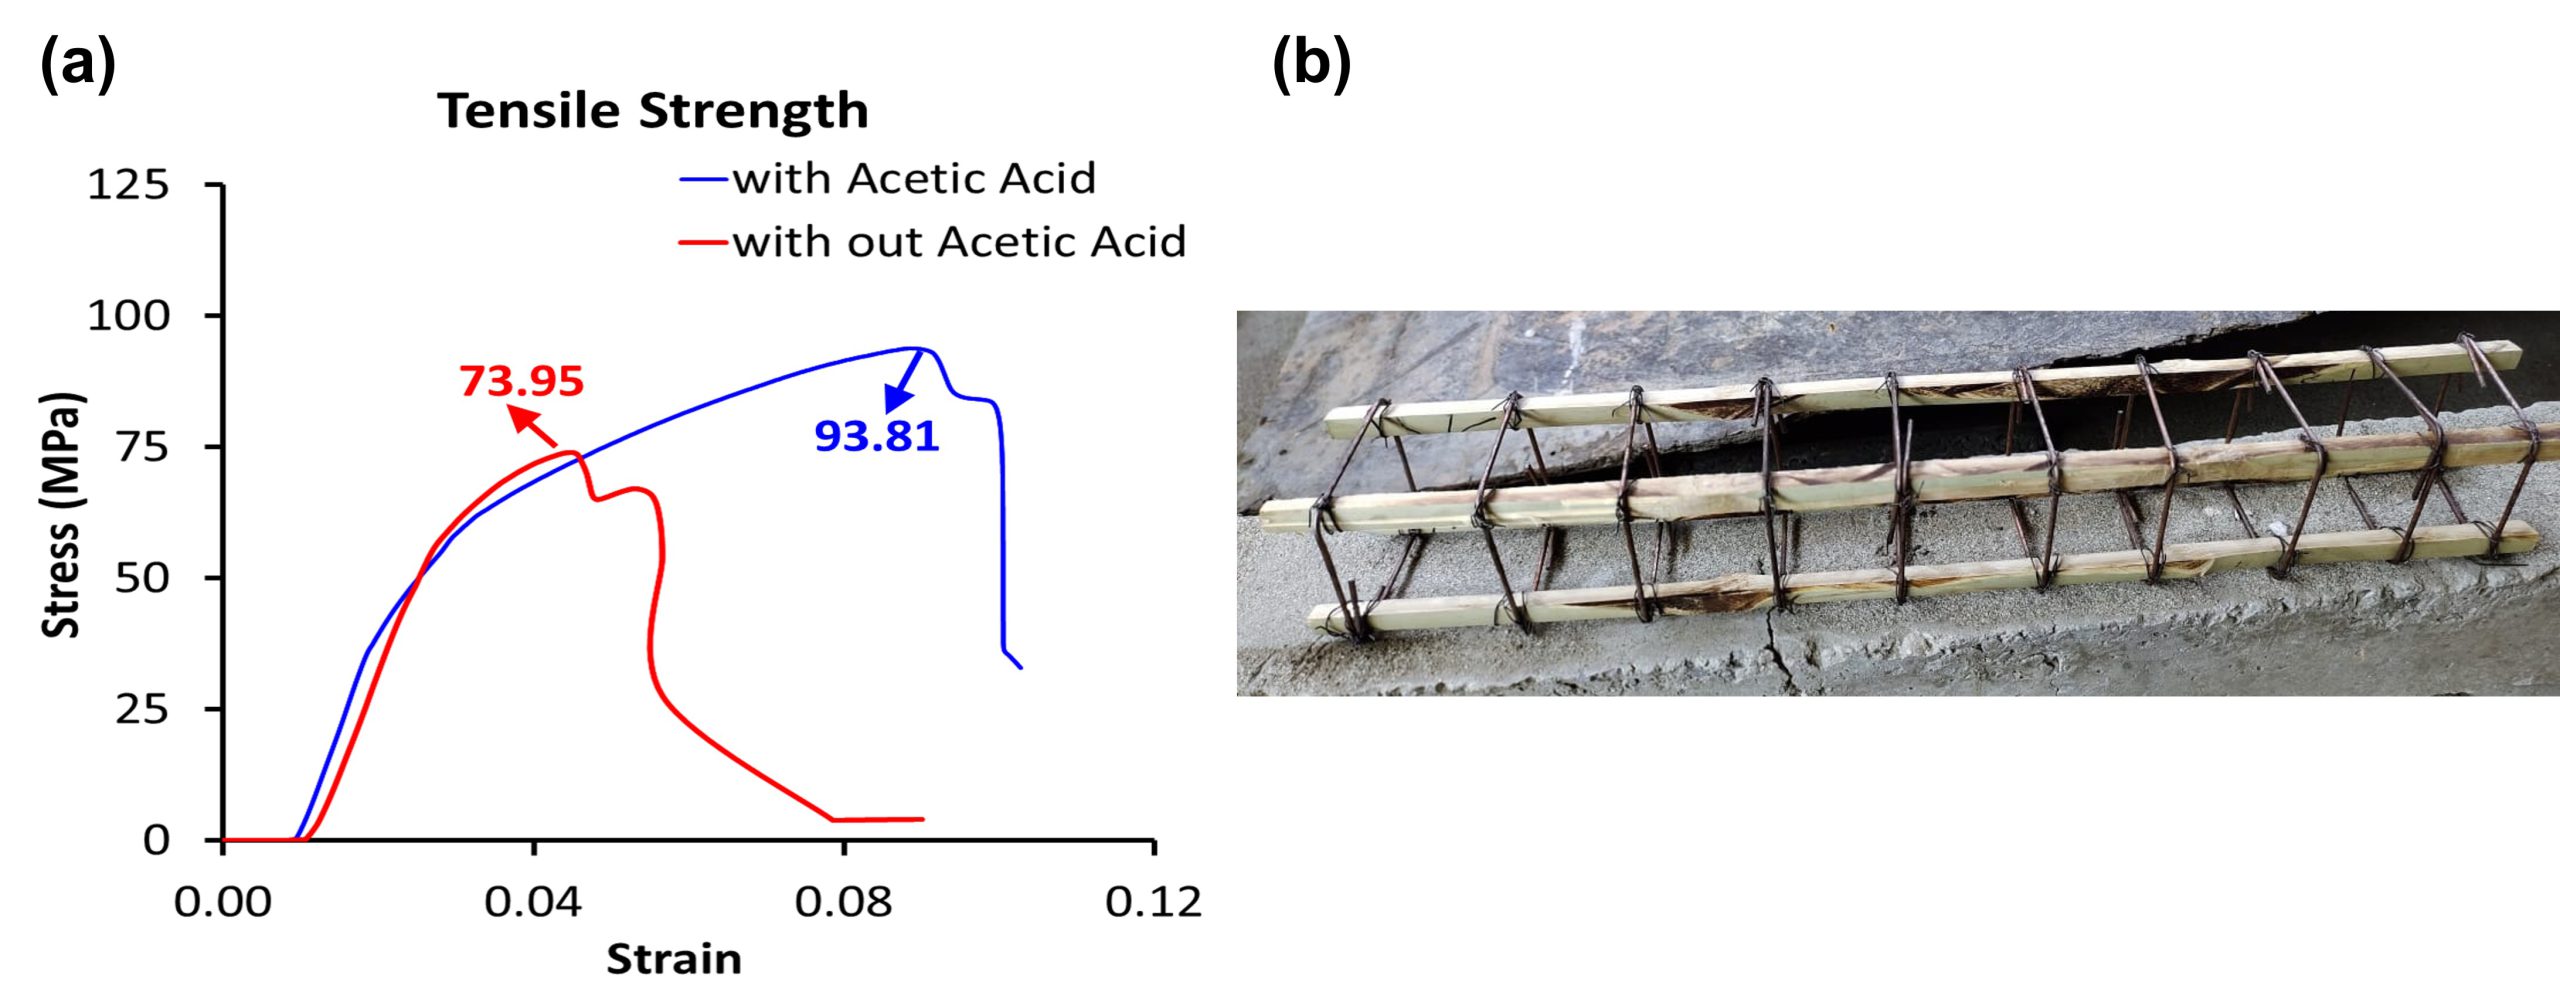 Figure 3: (a) Comparison of tensile strength of bamboo samples treated with and without acetic acid, (b) Bamboo in bean reinforcement (work in progress)